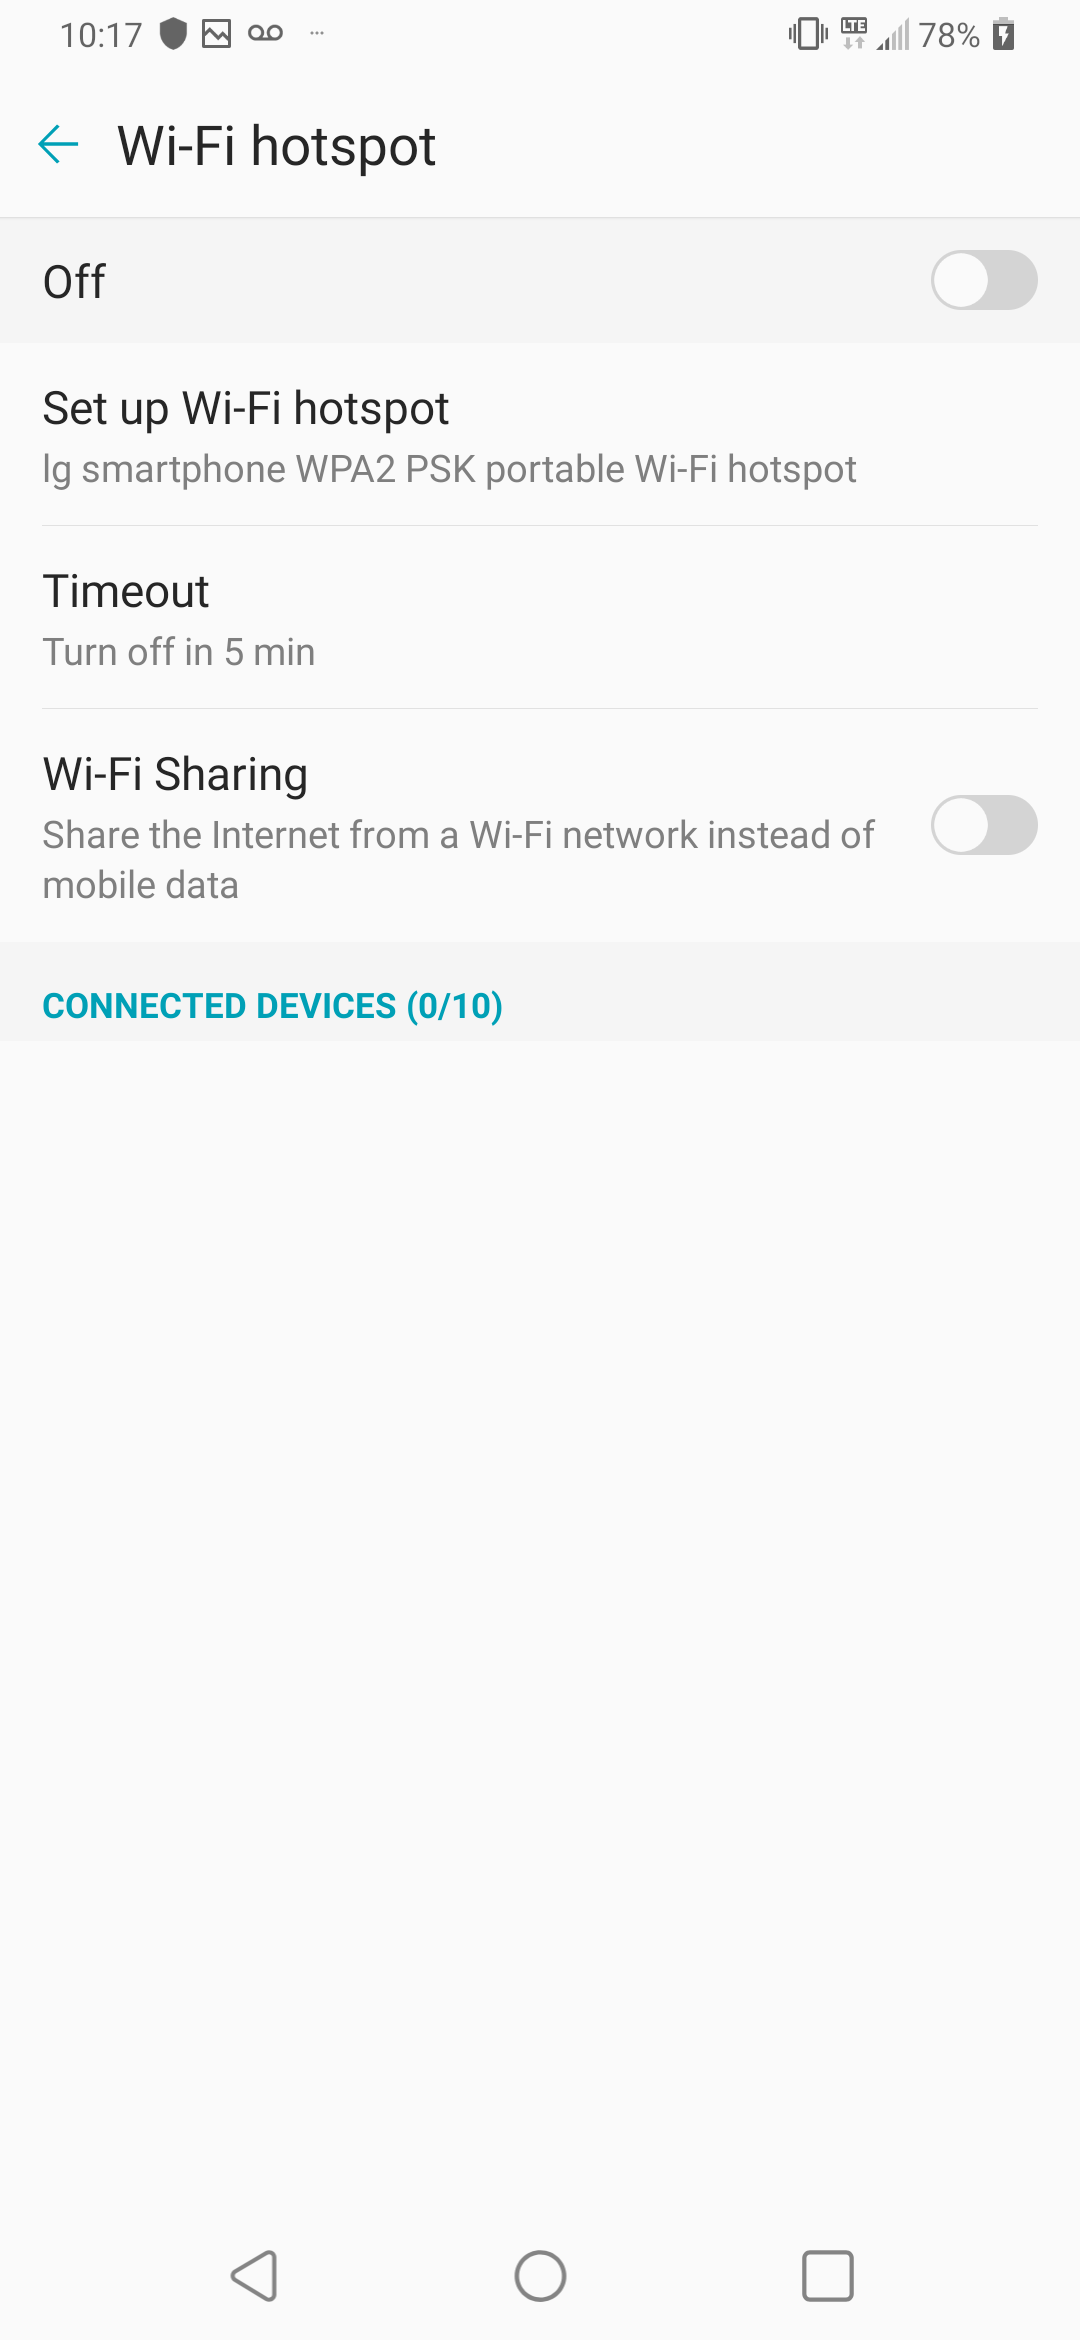 Touch the Wi-Fi hotspot slider to turn on the hotspot.